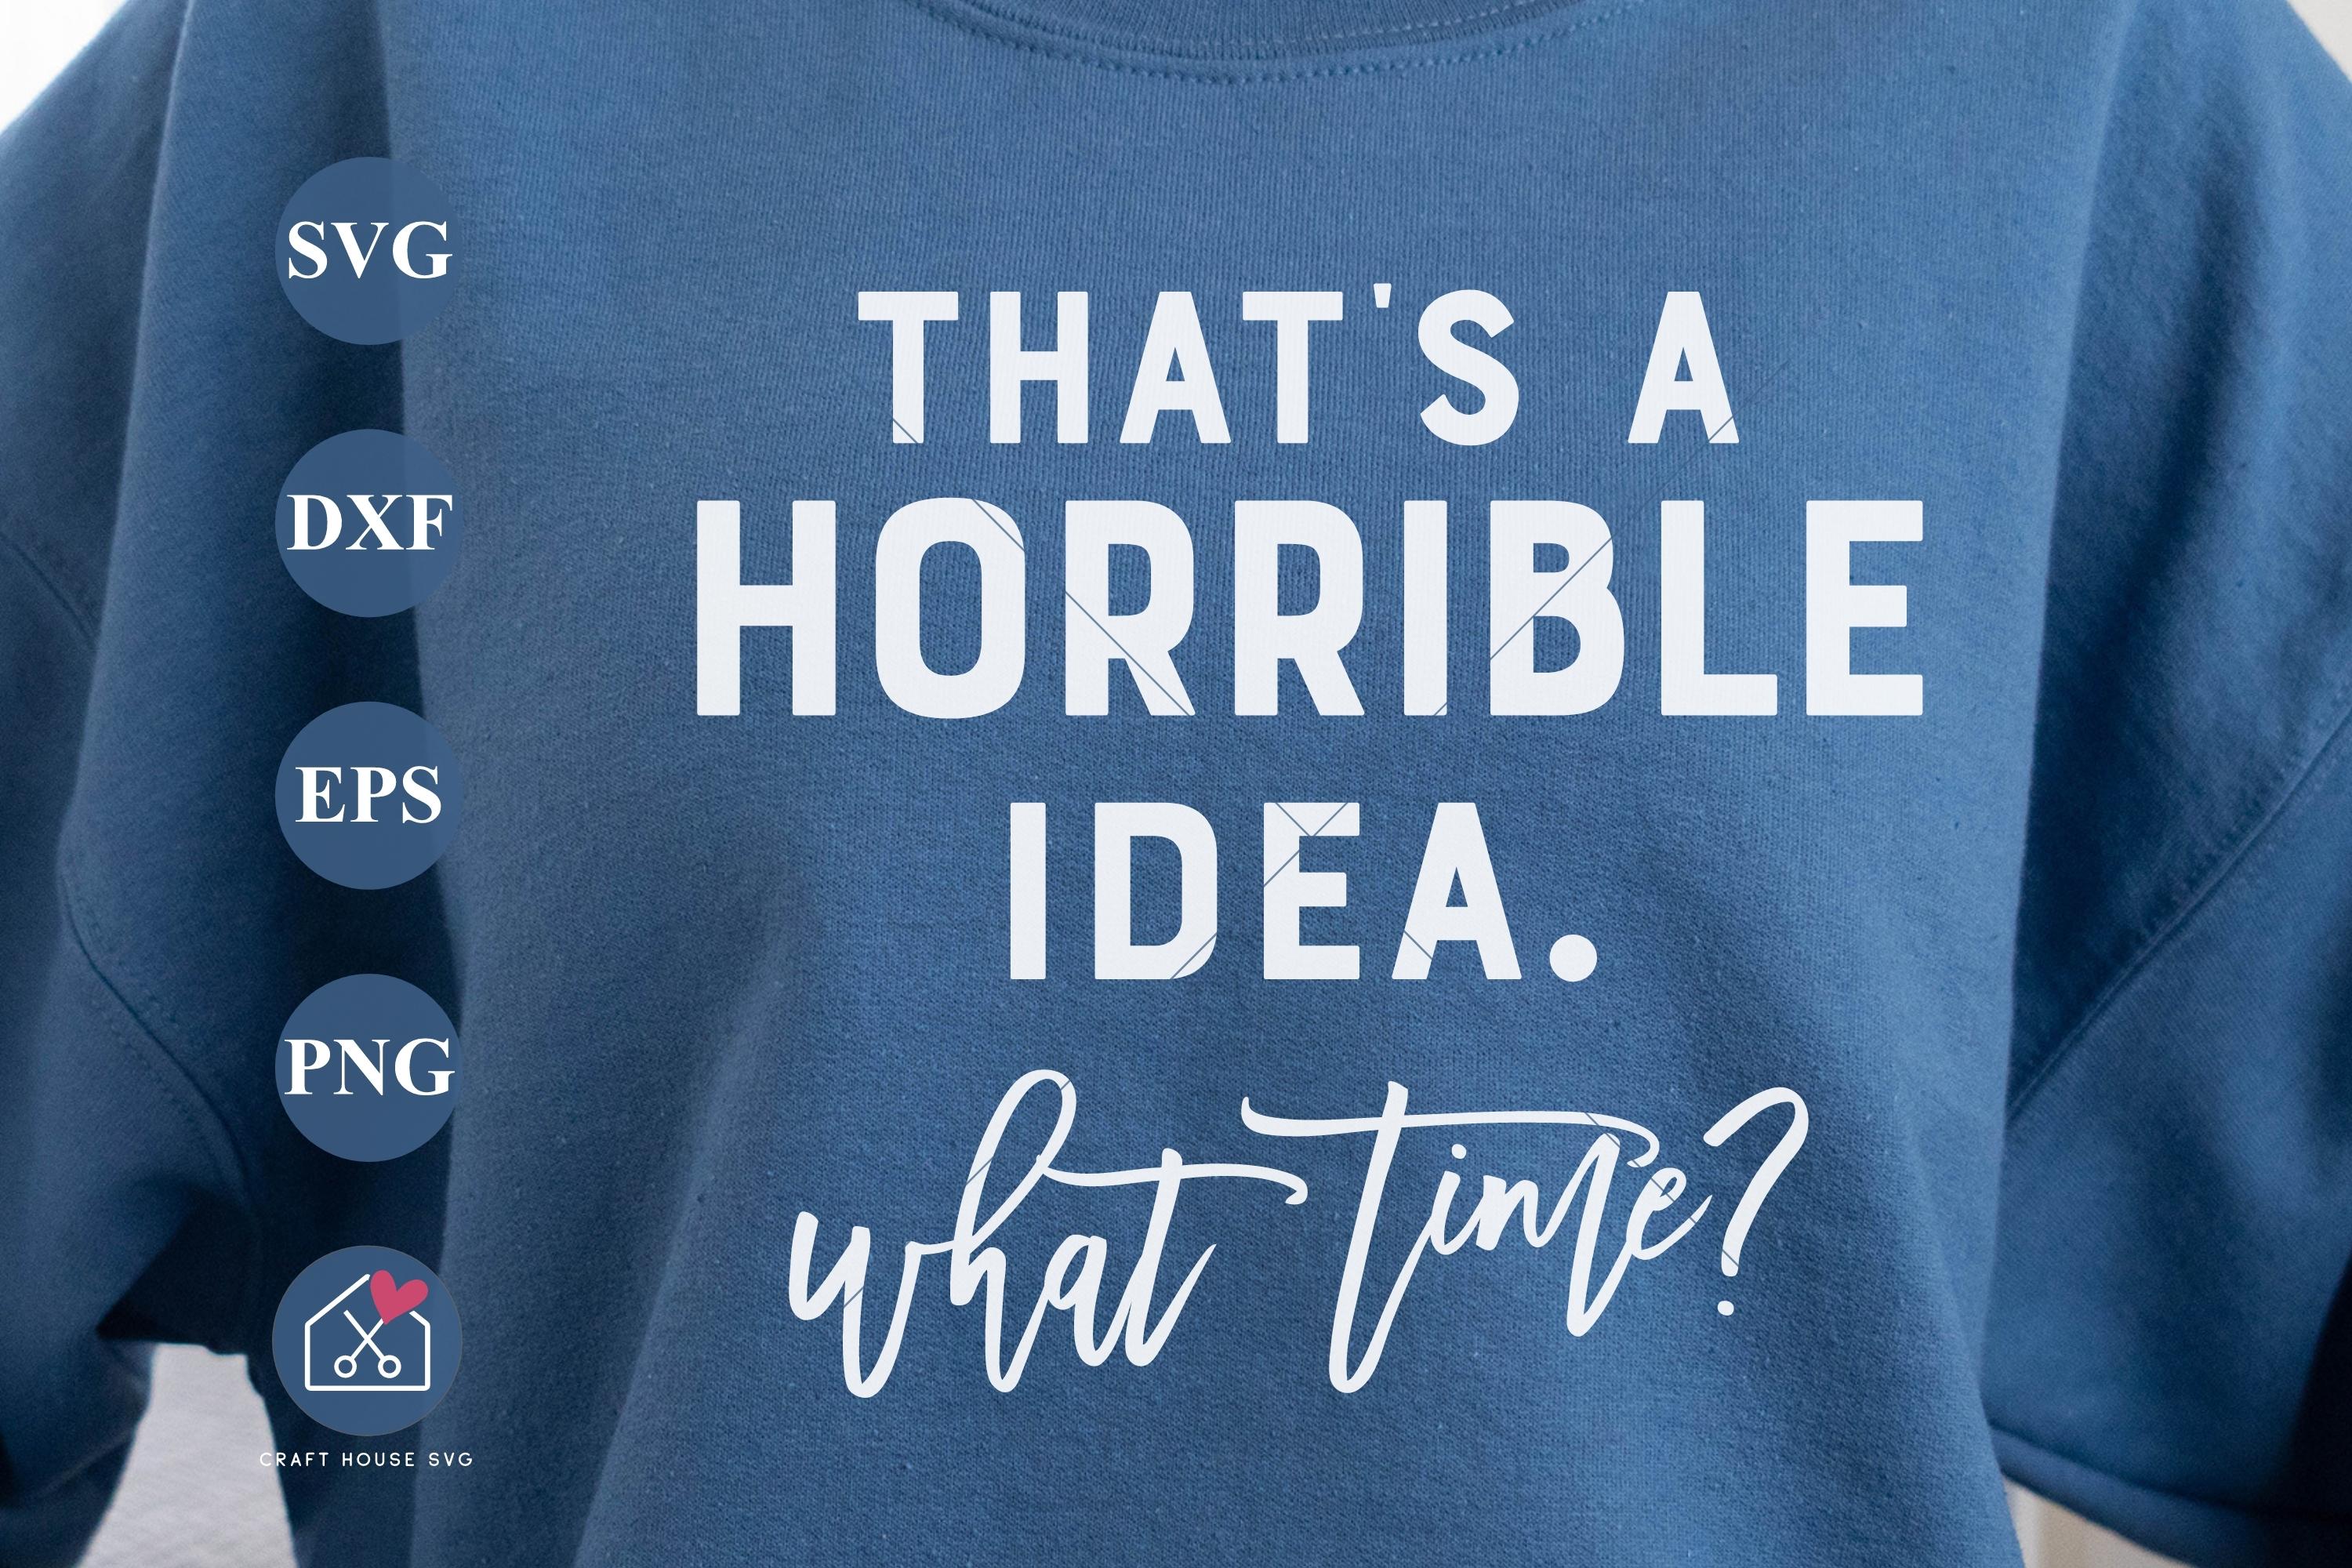 Thats A Horrible Idea What Time SVG Funny Shirt Design Cut File